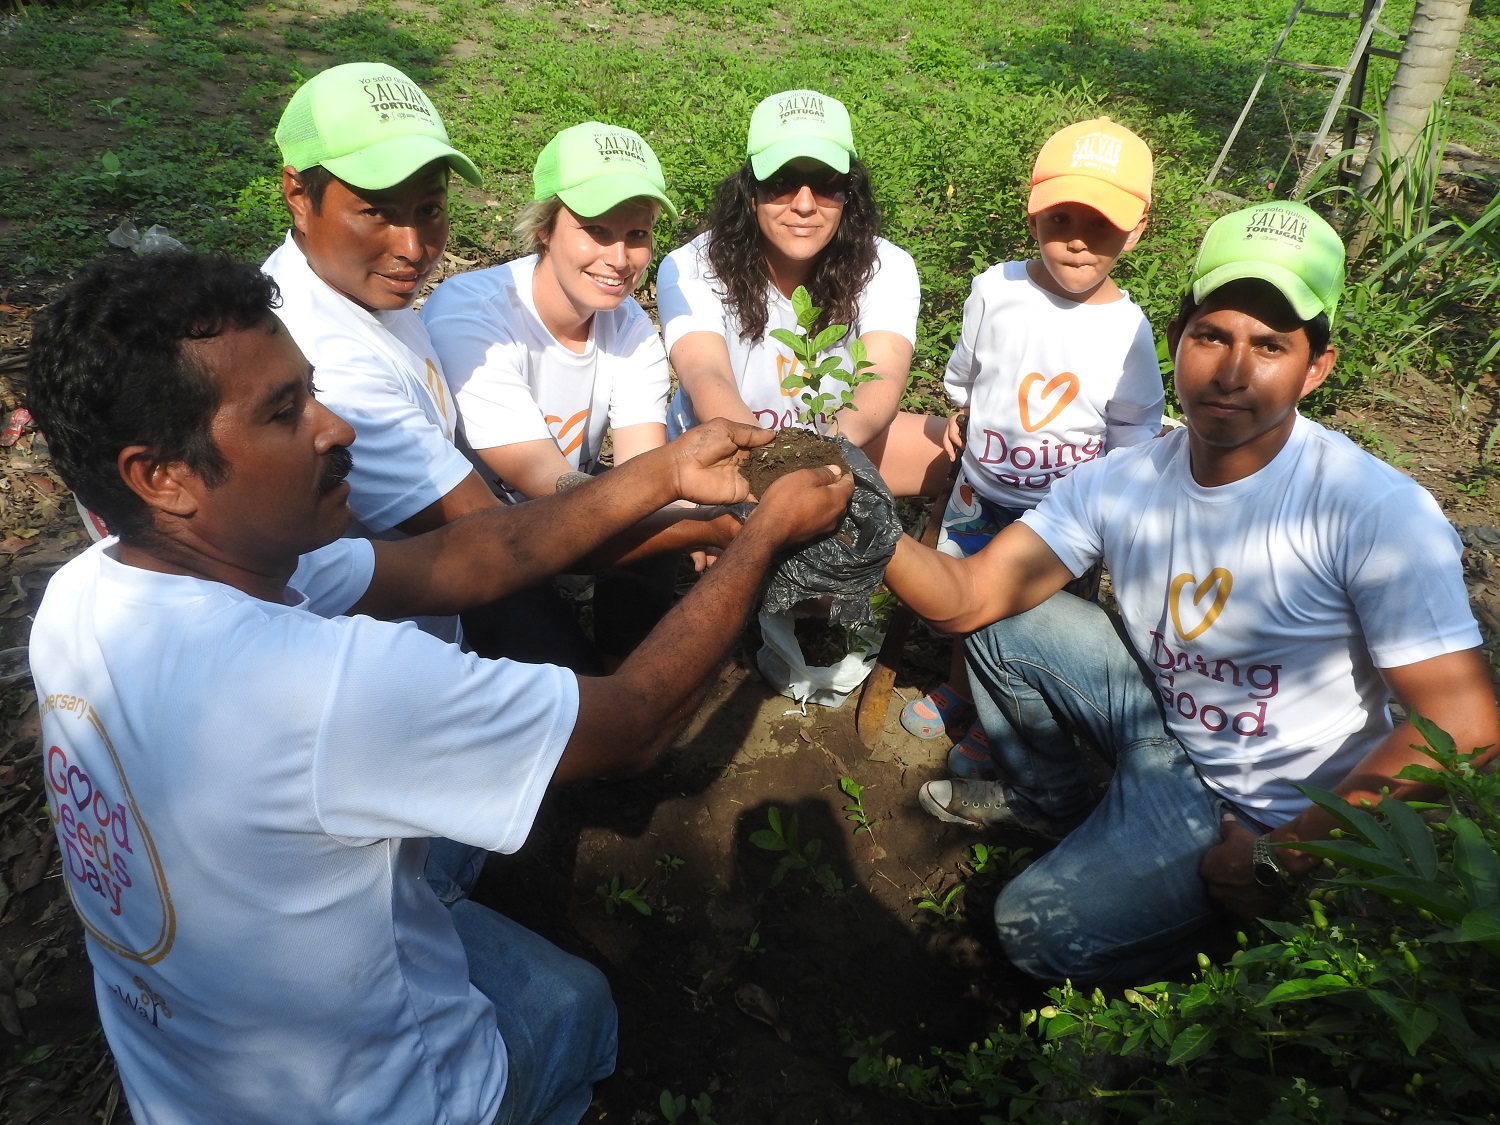 The Yepez Foundation builds bonds and plants trees for a local community garden.